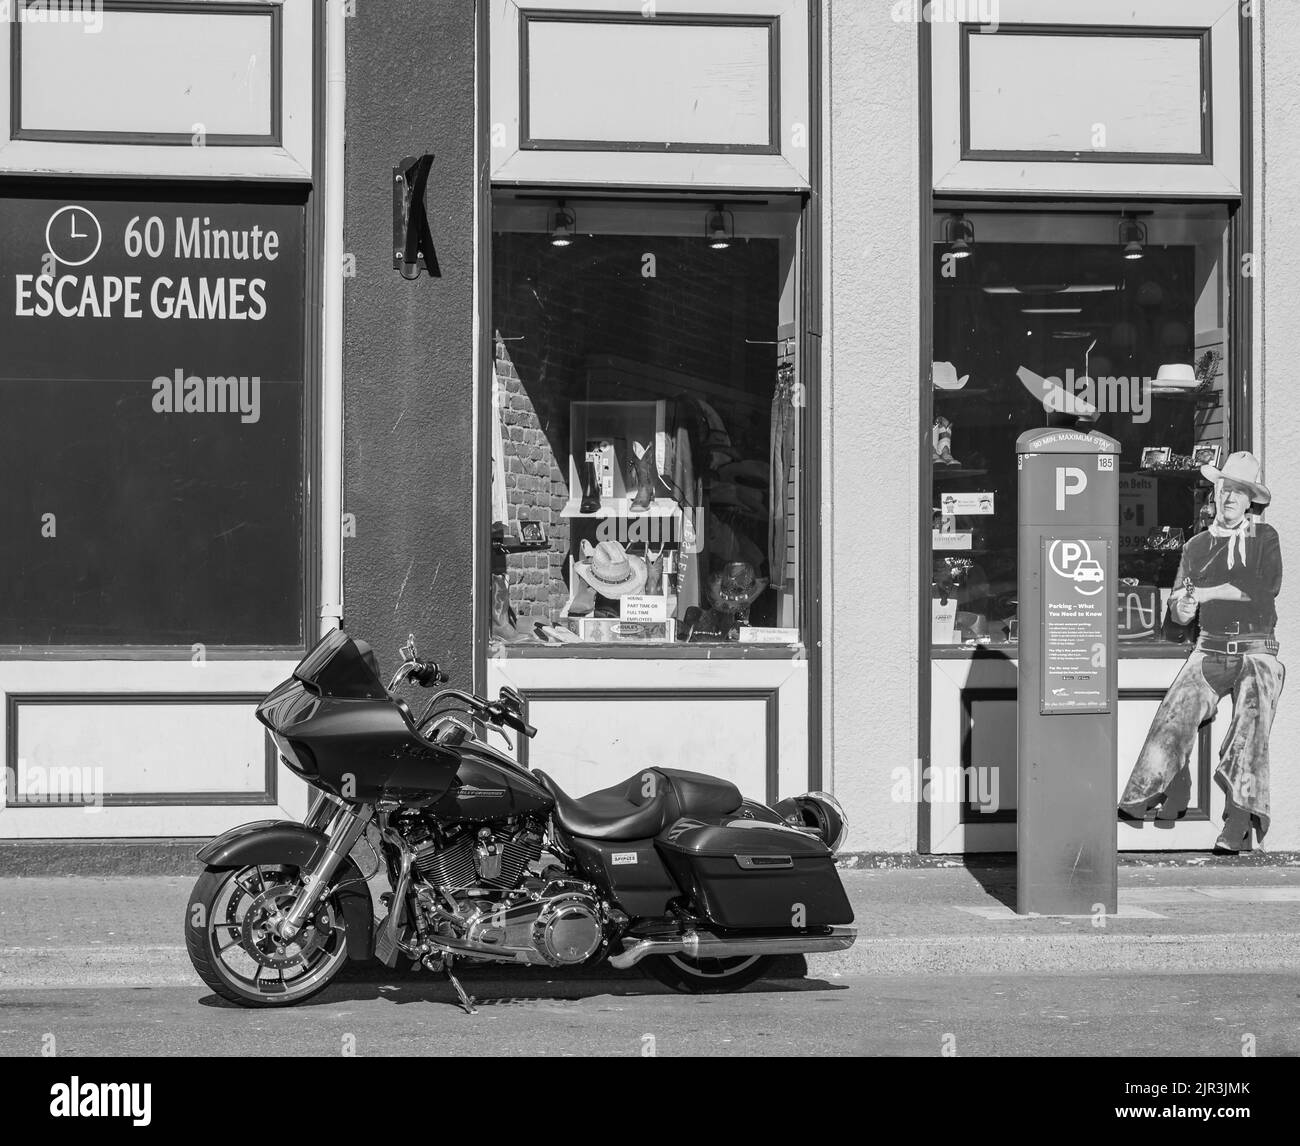 Harley Davidson Motorcycle on the city street. Black motorbike in black and white photo Stock Photo